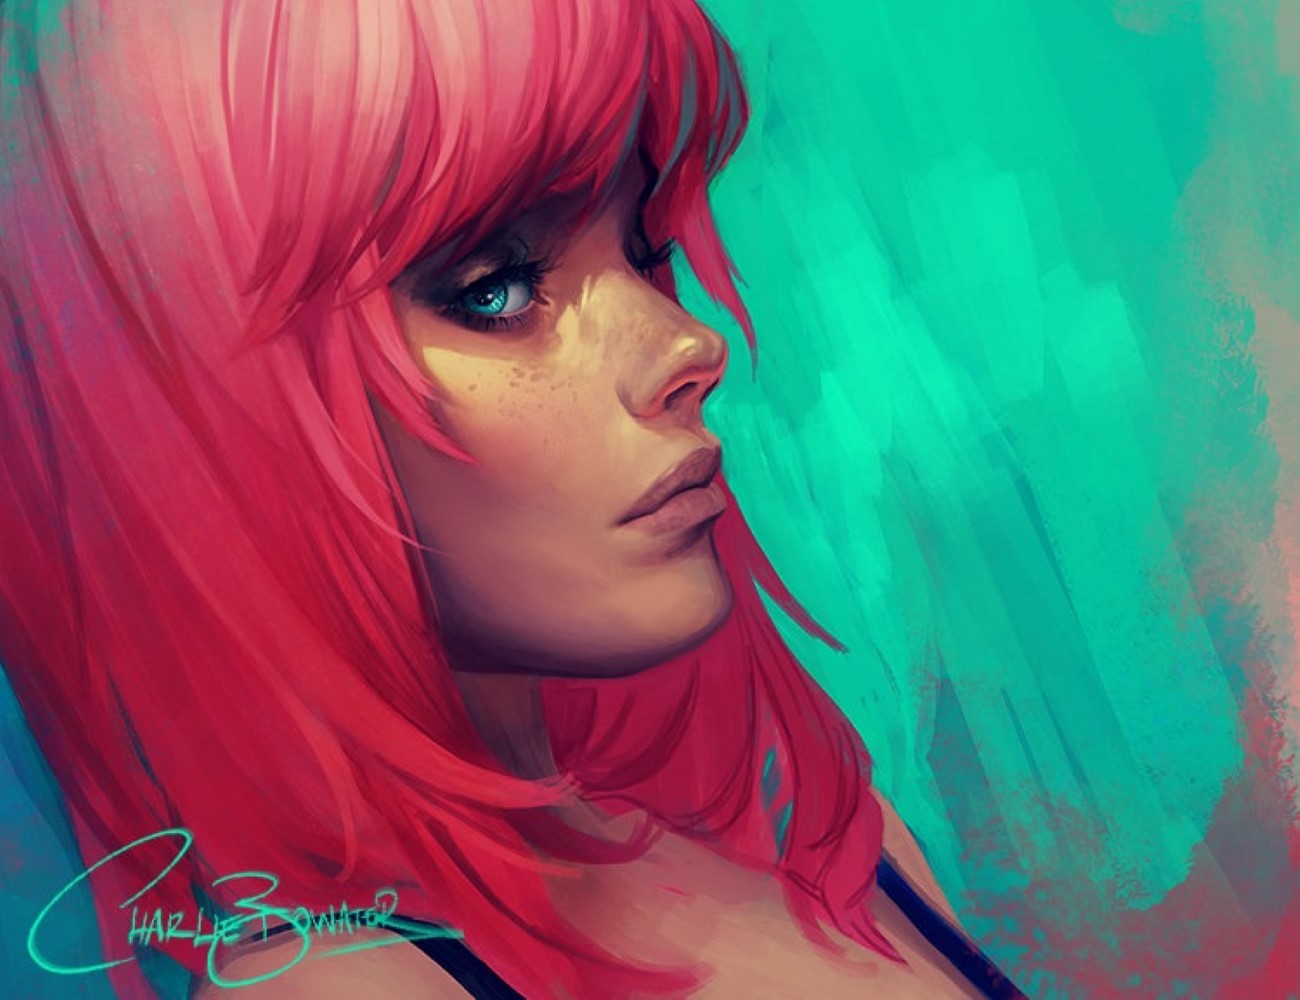 Charlie Bowater | Digital Painting & Art Inspiration on Paintable.cc